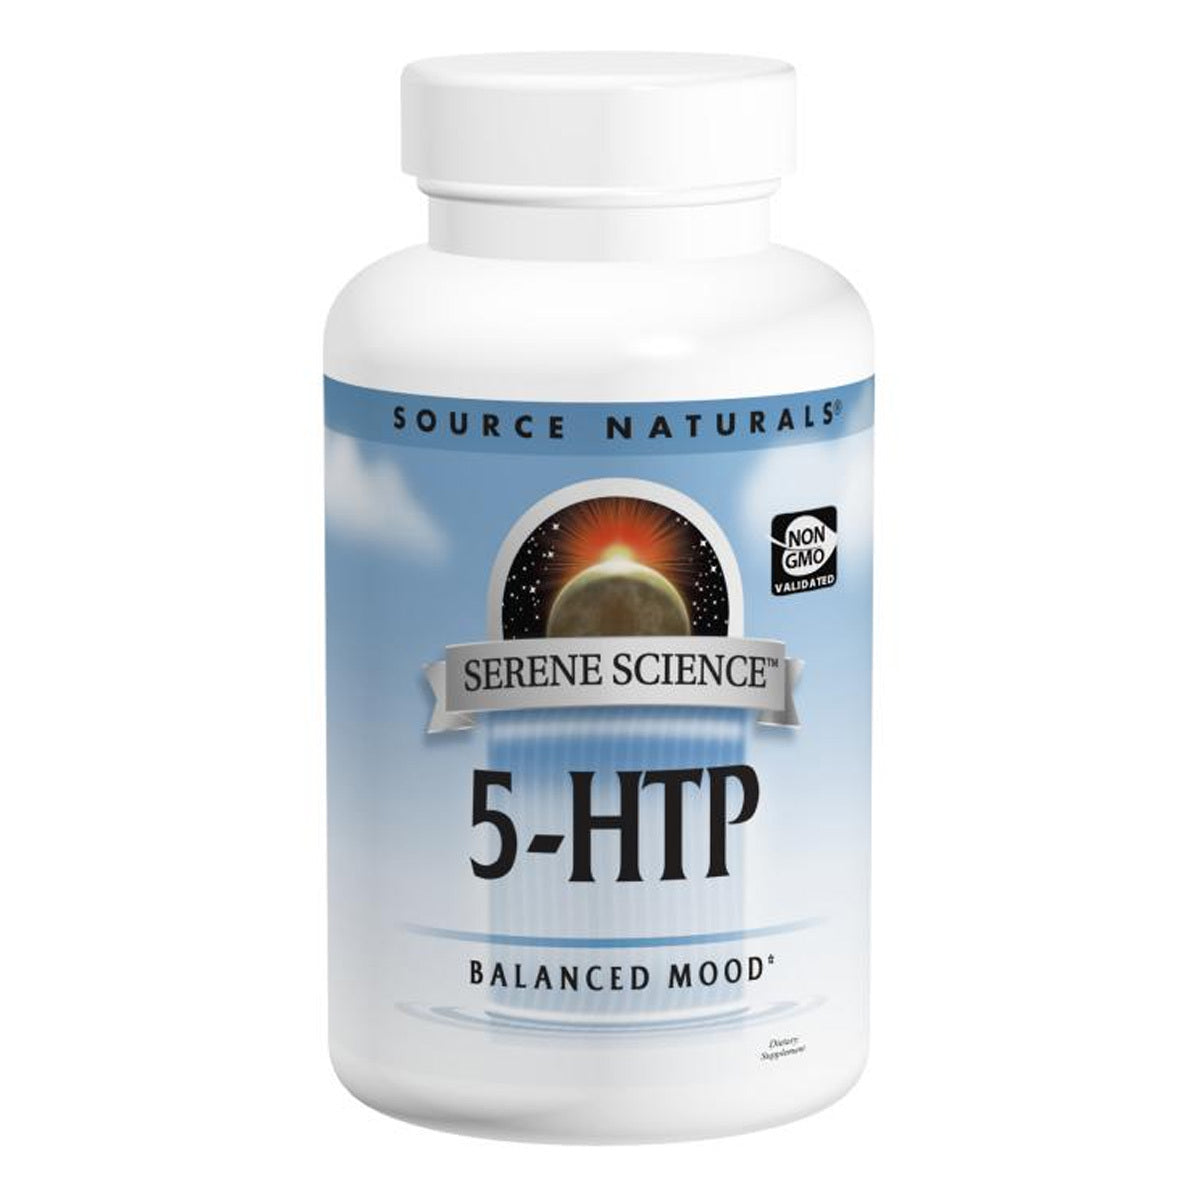 Primary image of 5-HTP 100mg caps